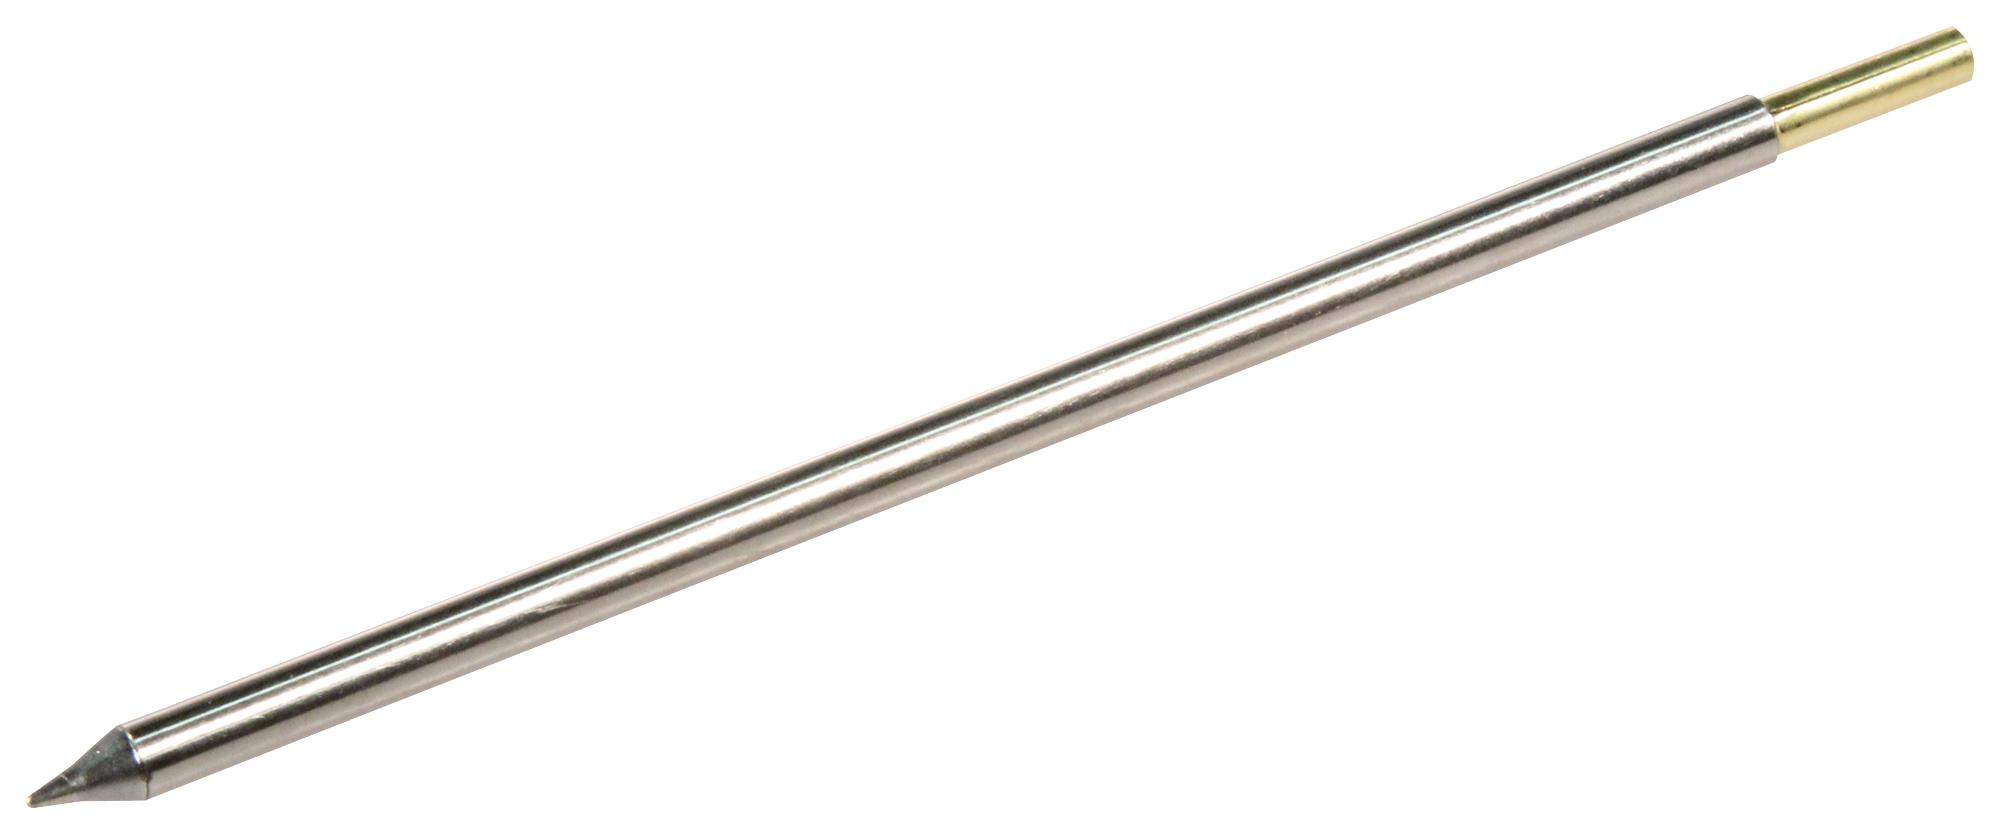 STTC-101P TIP, POWER, CONICAL, 1MM METCAL